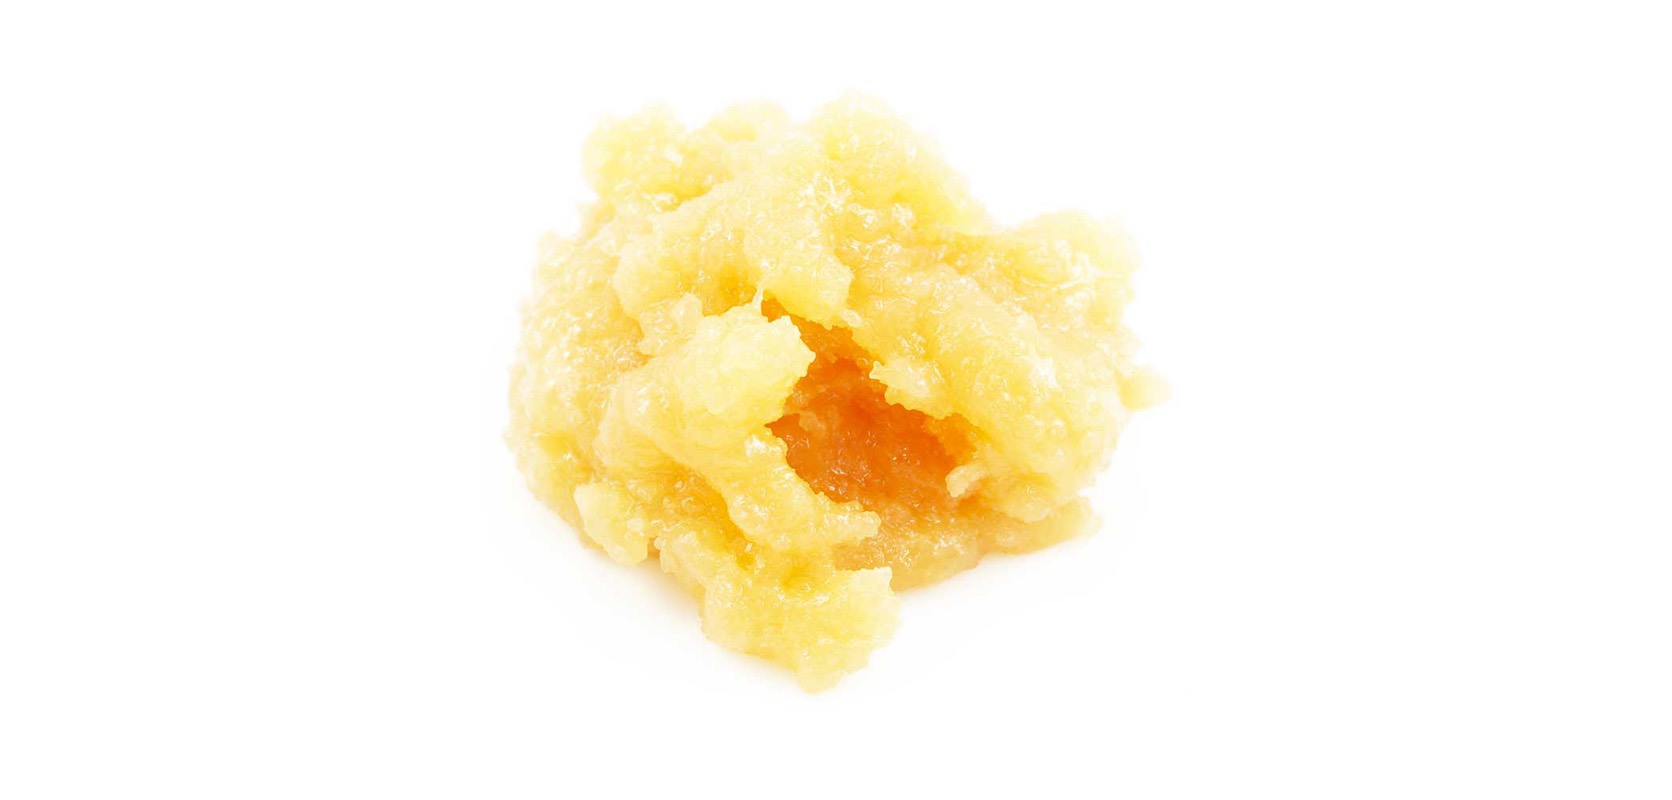 White Widow Caviar Concentrate dab drug at weed dispensary for mail order marijuana and weed online Canada. Value buds and cheapweed.